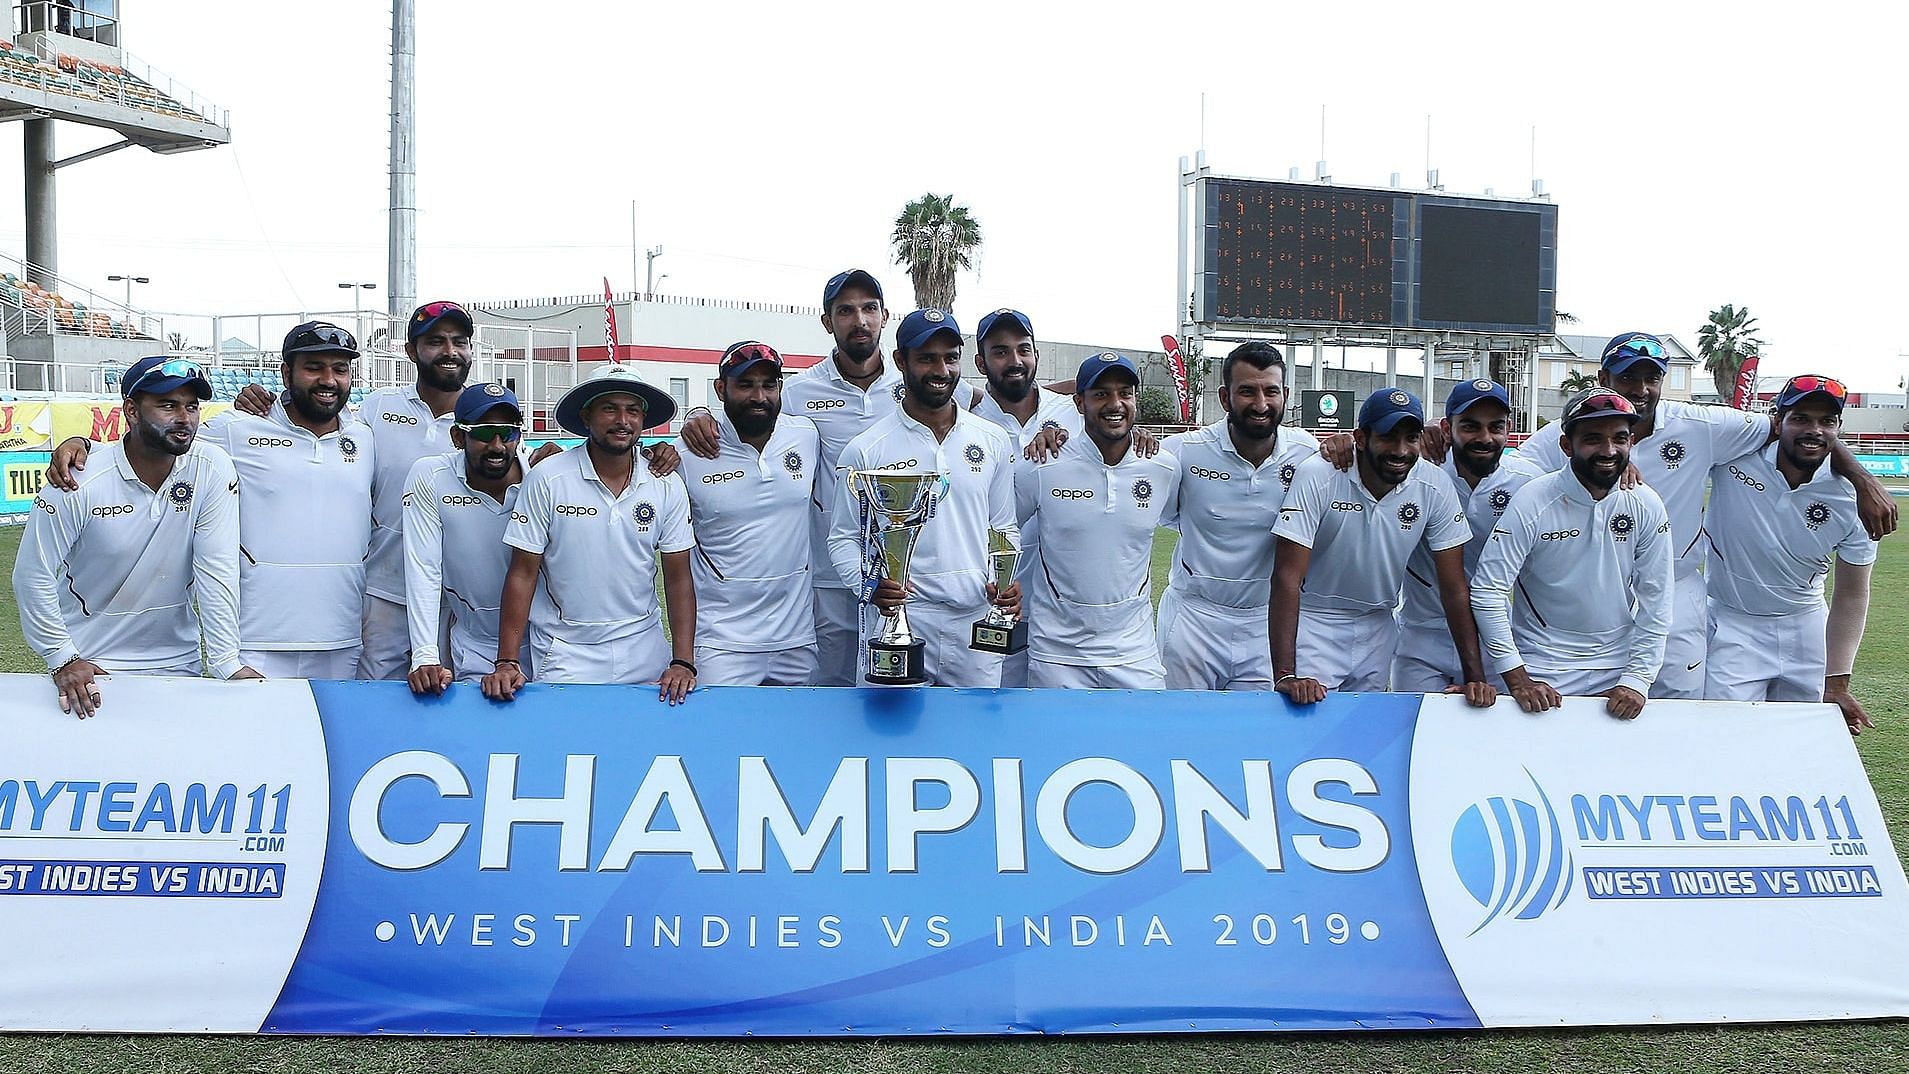 India’s bowlers took five wickets in just over an hour to help complete a 257-run win over West Indies and clinch a 2-0 Test series victory.